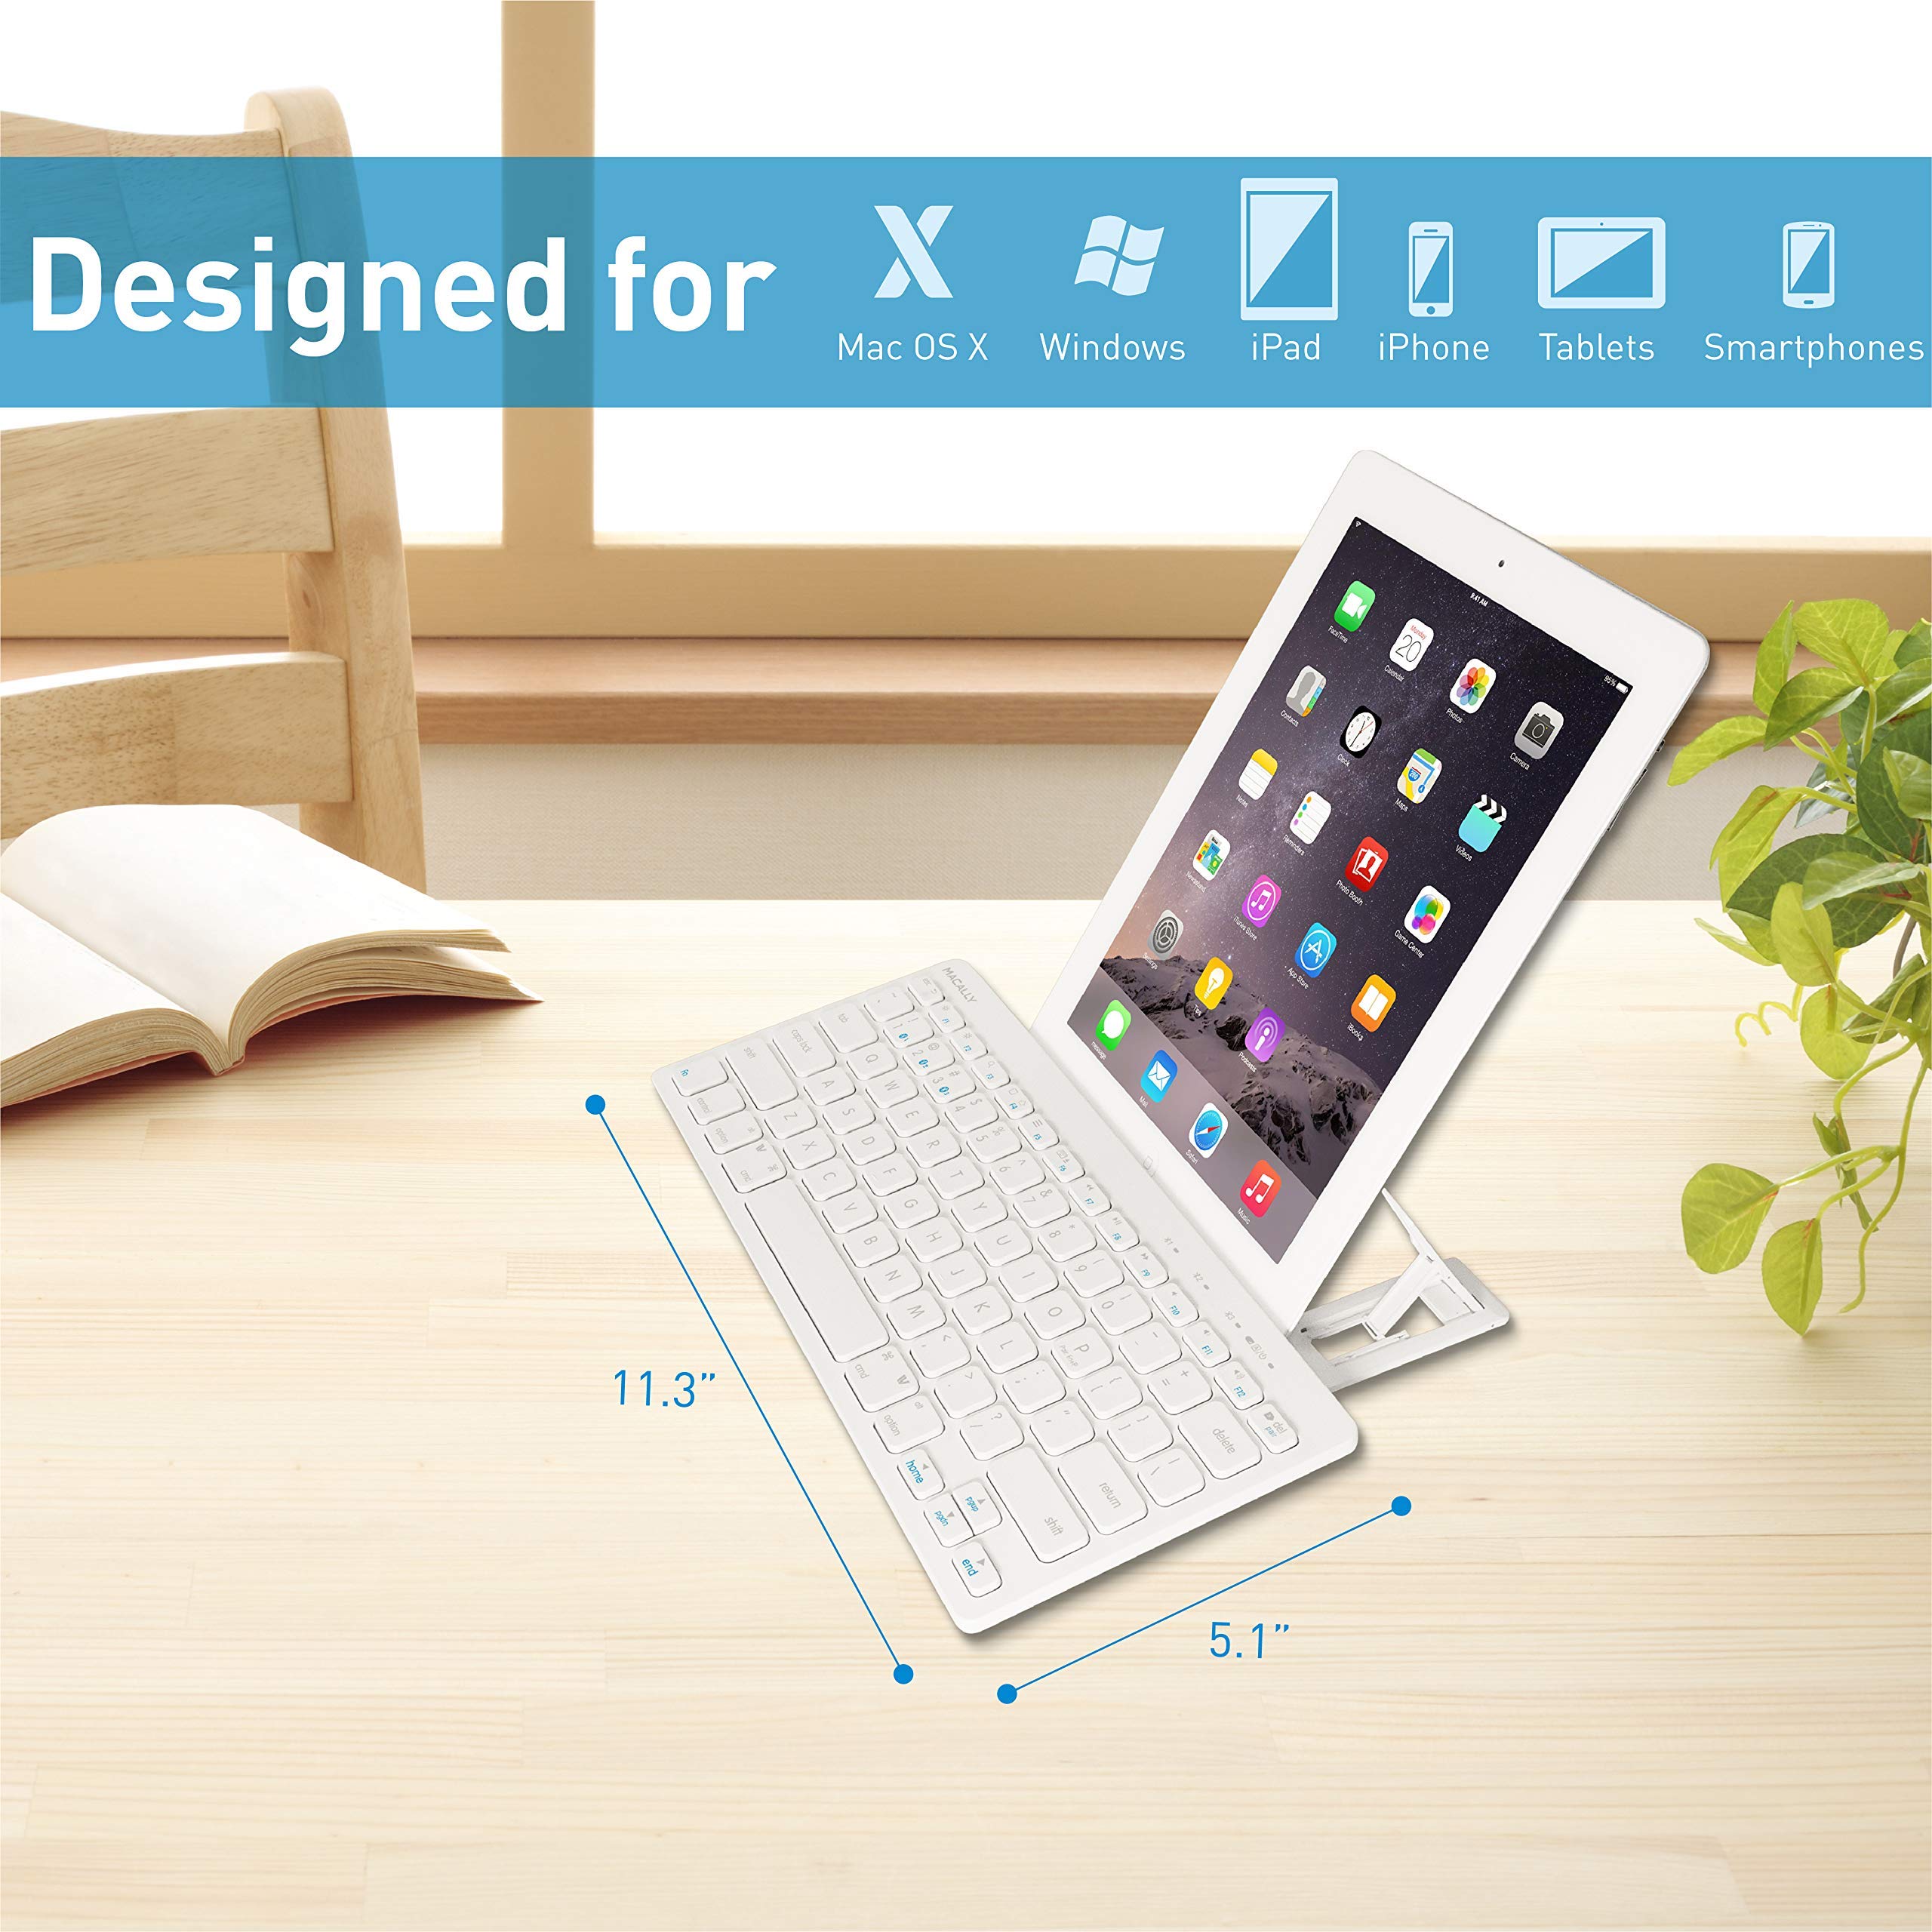 Small Bluetooth Mac Keyboard, Wireless Bluetooth Mouse and Ergonomic Laptop Stand, Amazing College Student Gift